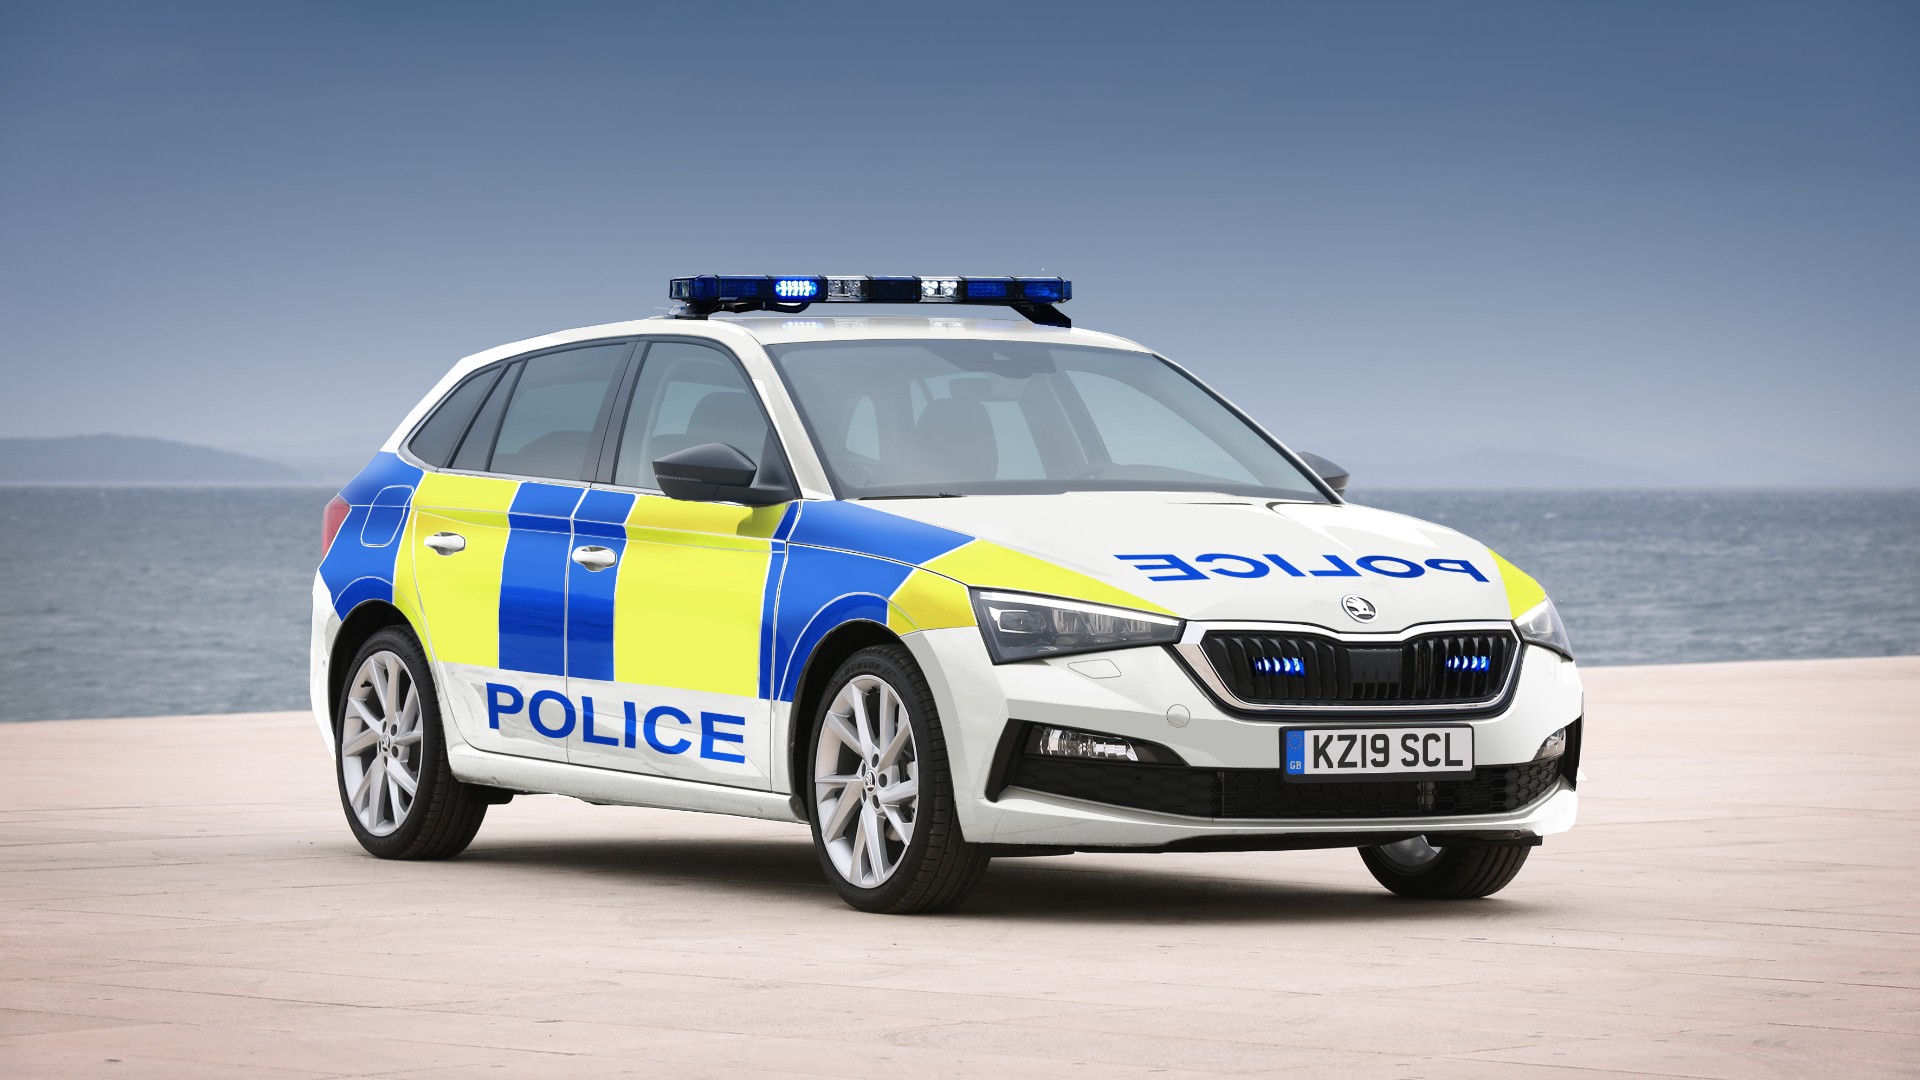 Skoda Scala now available to Police and other services